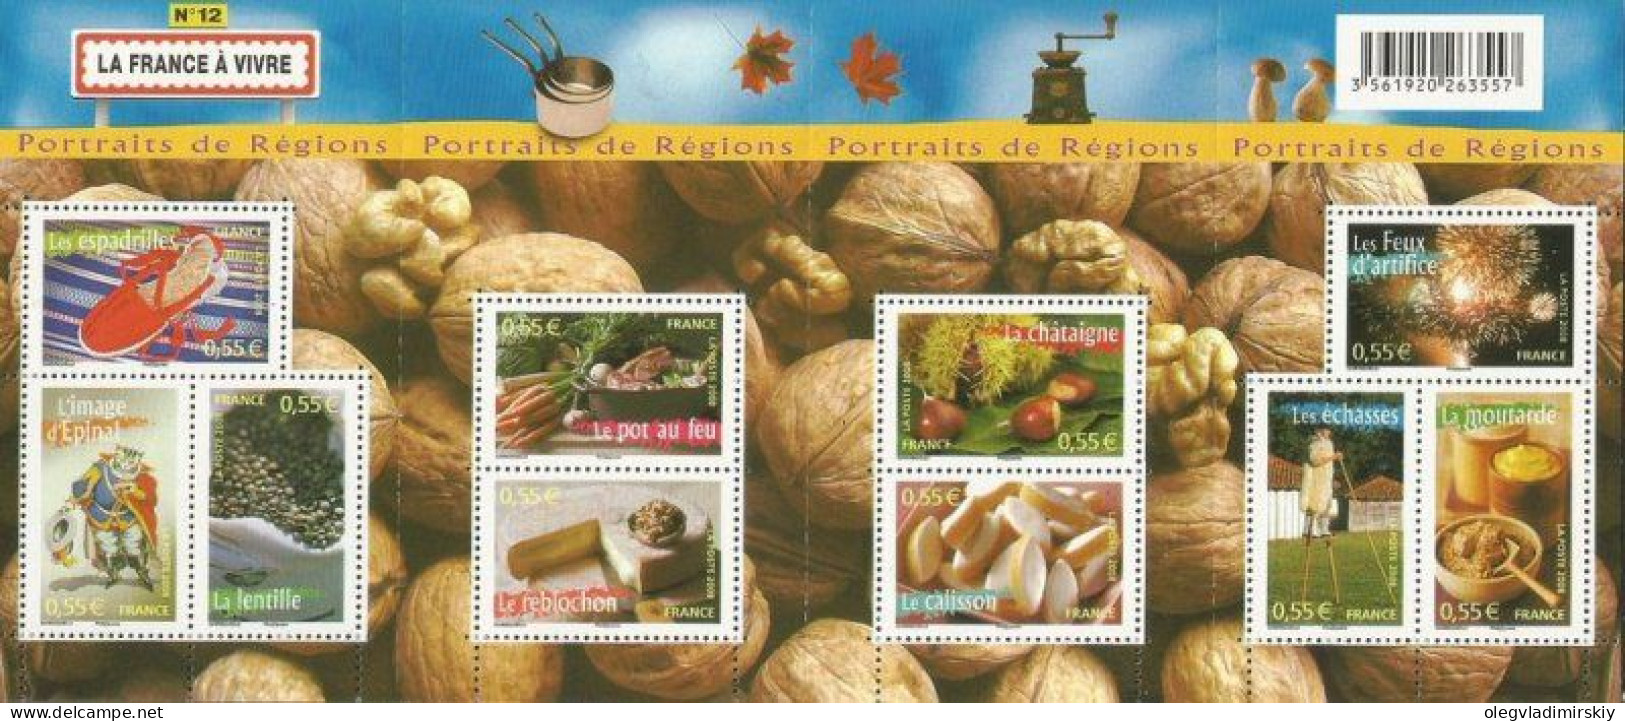 France 2008 Regions Provinces 12th Issue Set Of 10 Stamps In Block MNH - Unused Stamps